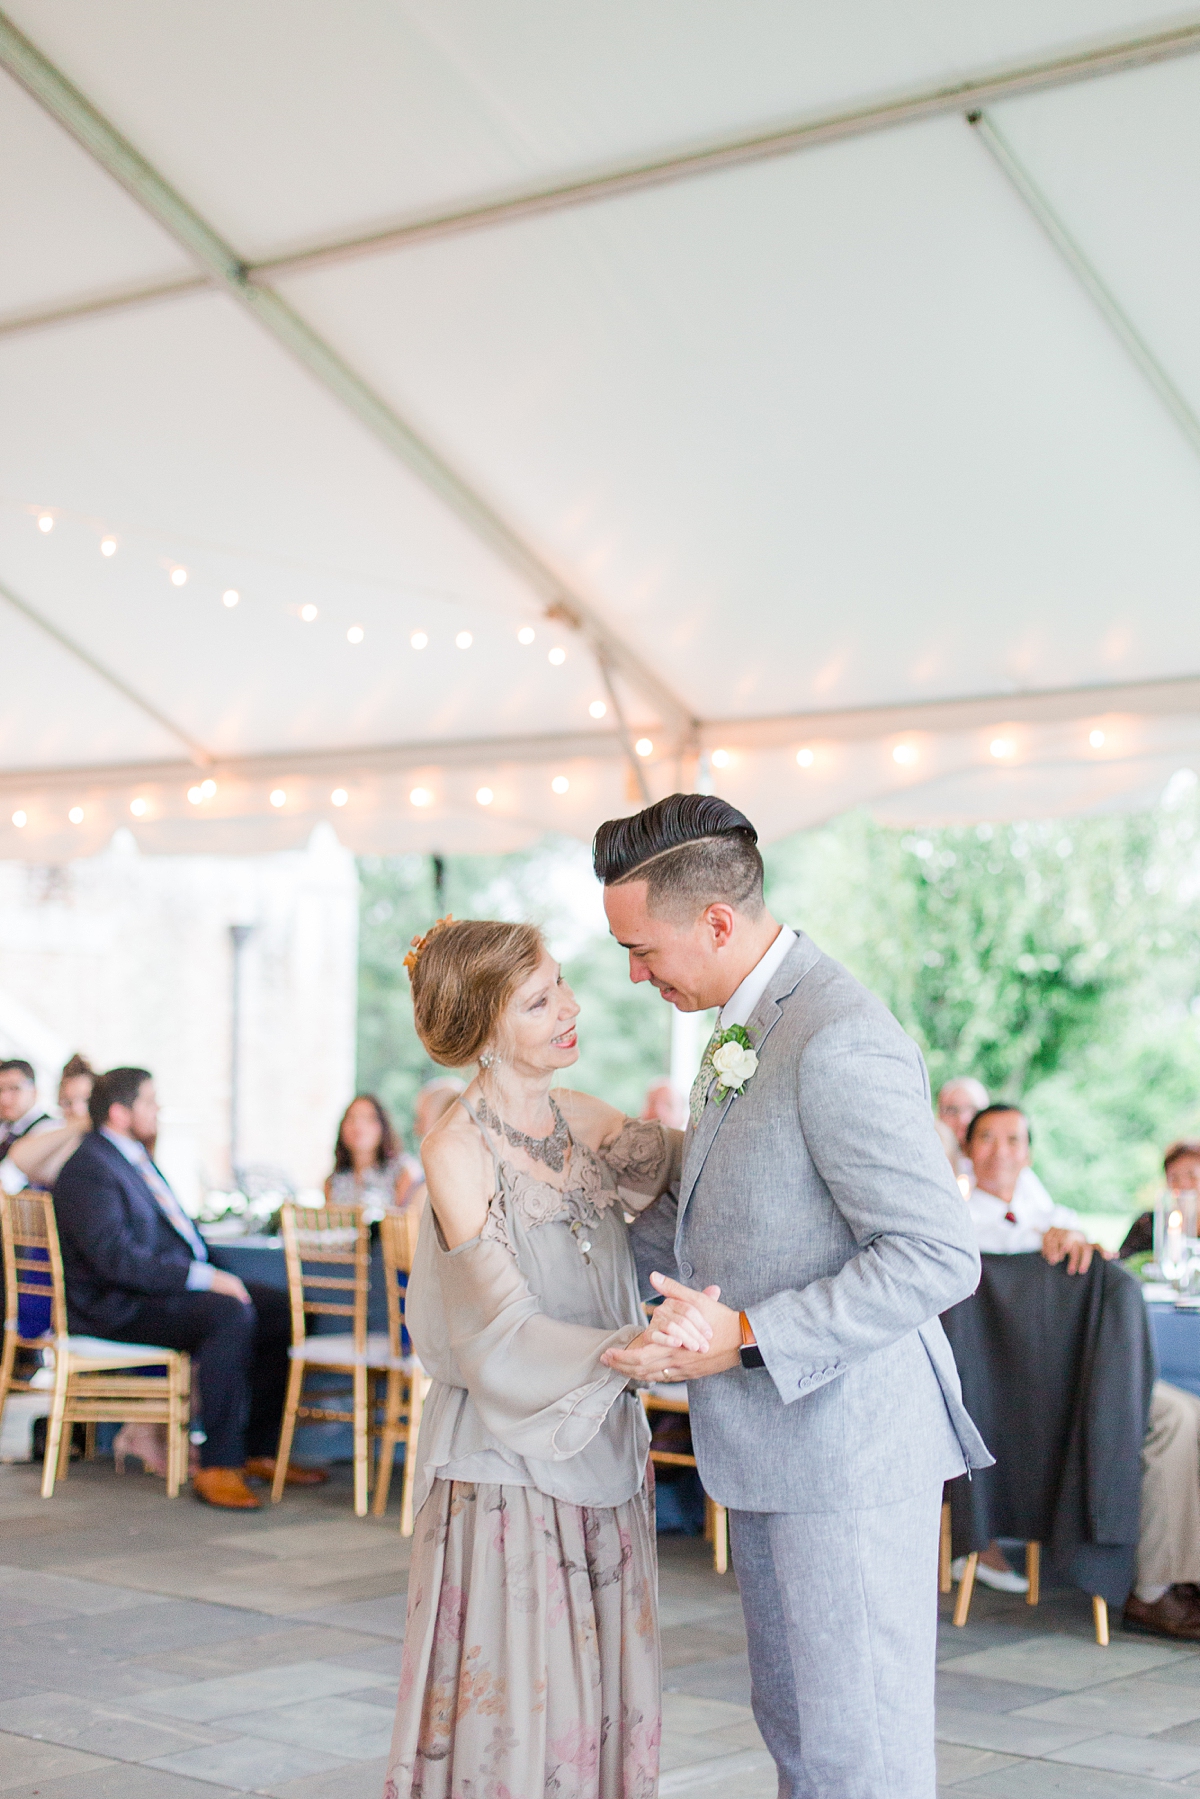 Mother Son Dance with a Mountain View at a Grace Estate Winery Wedding Reception. Wedding Photography by Richmond Wedding Photographer Kailey Brianne Photography.